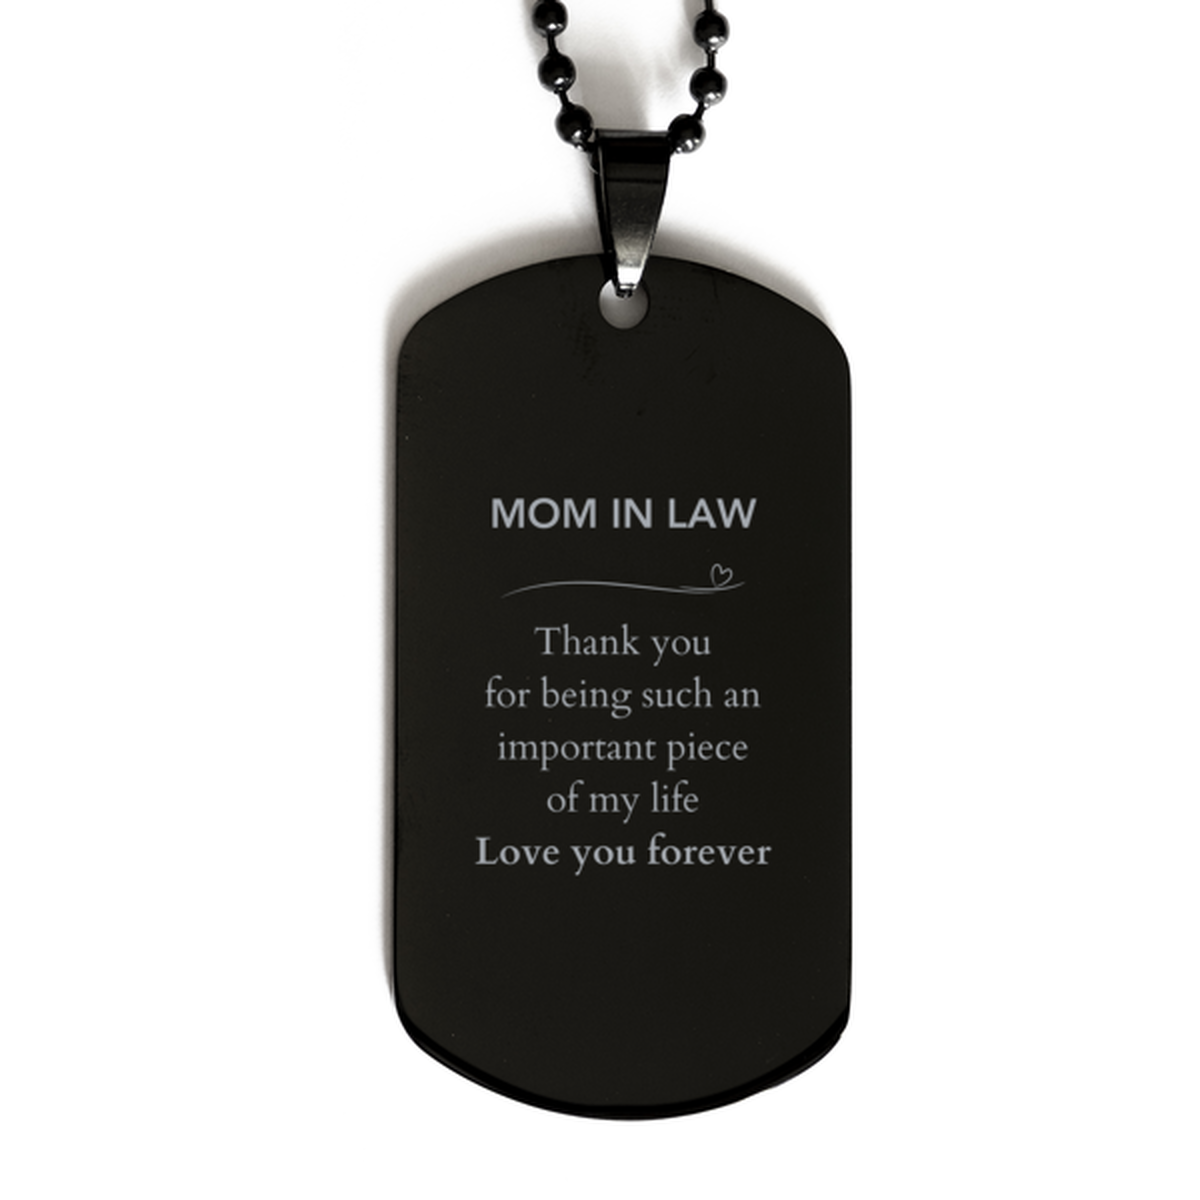 Appropriate Mom In Law Black Dog Tag Epic Birthday Gifts for Mom In Law Thank you for being such an important piece of my life Mom In Law Christmas Mothers Fathers Day